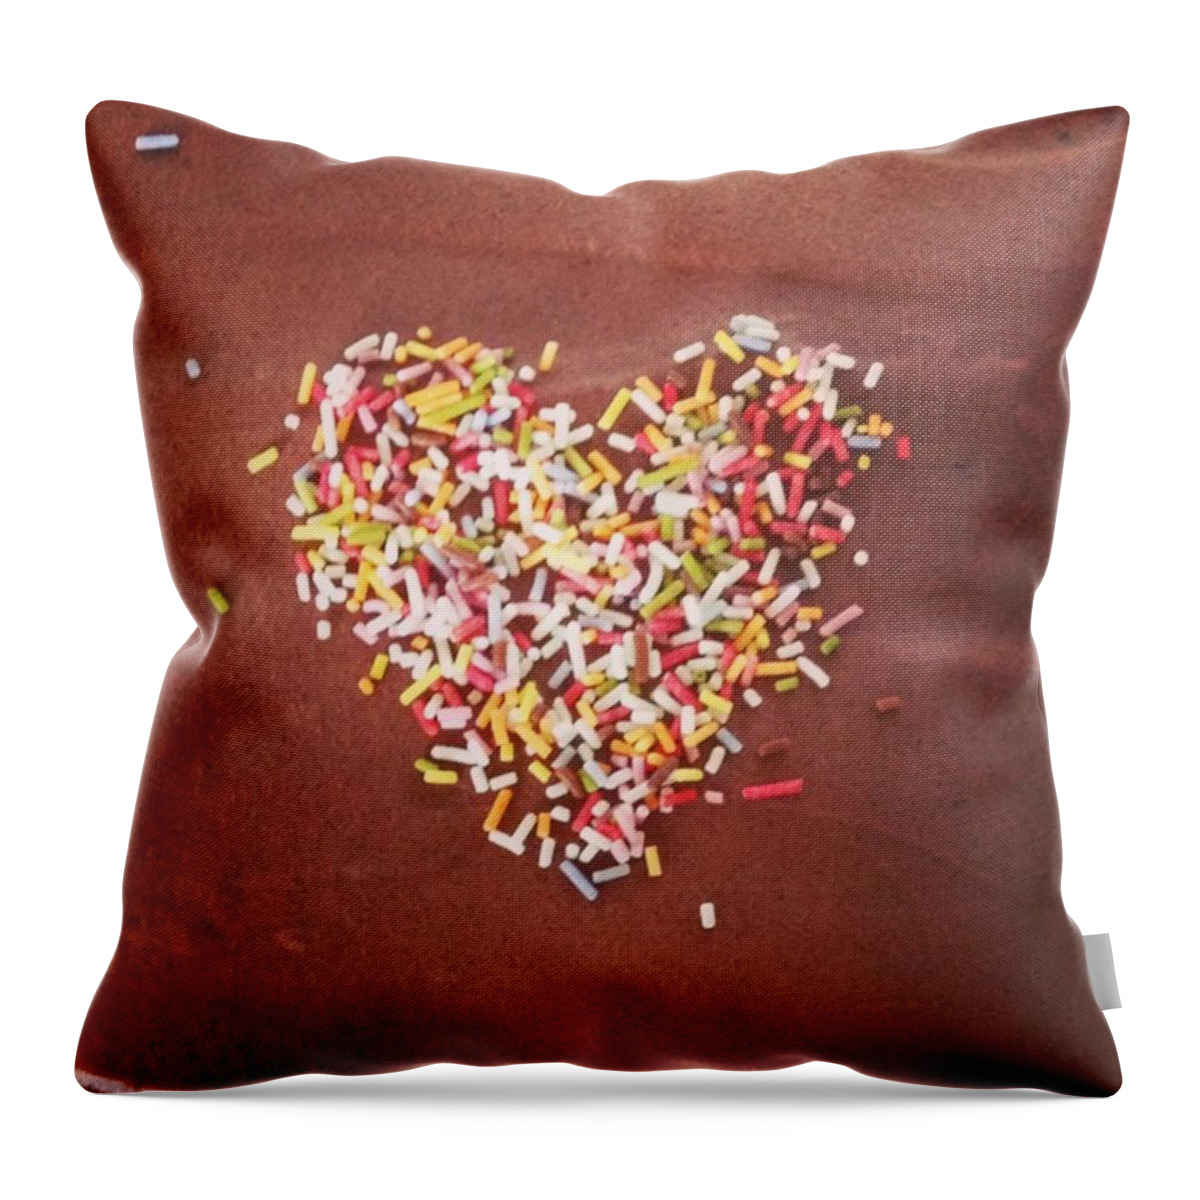 Tooromanticmoods Throw Pillow featuring the photograph Chocolate Love by Gypsy Heart